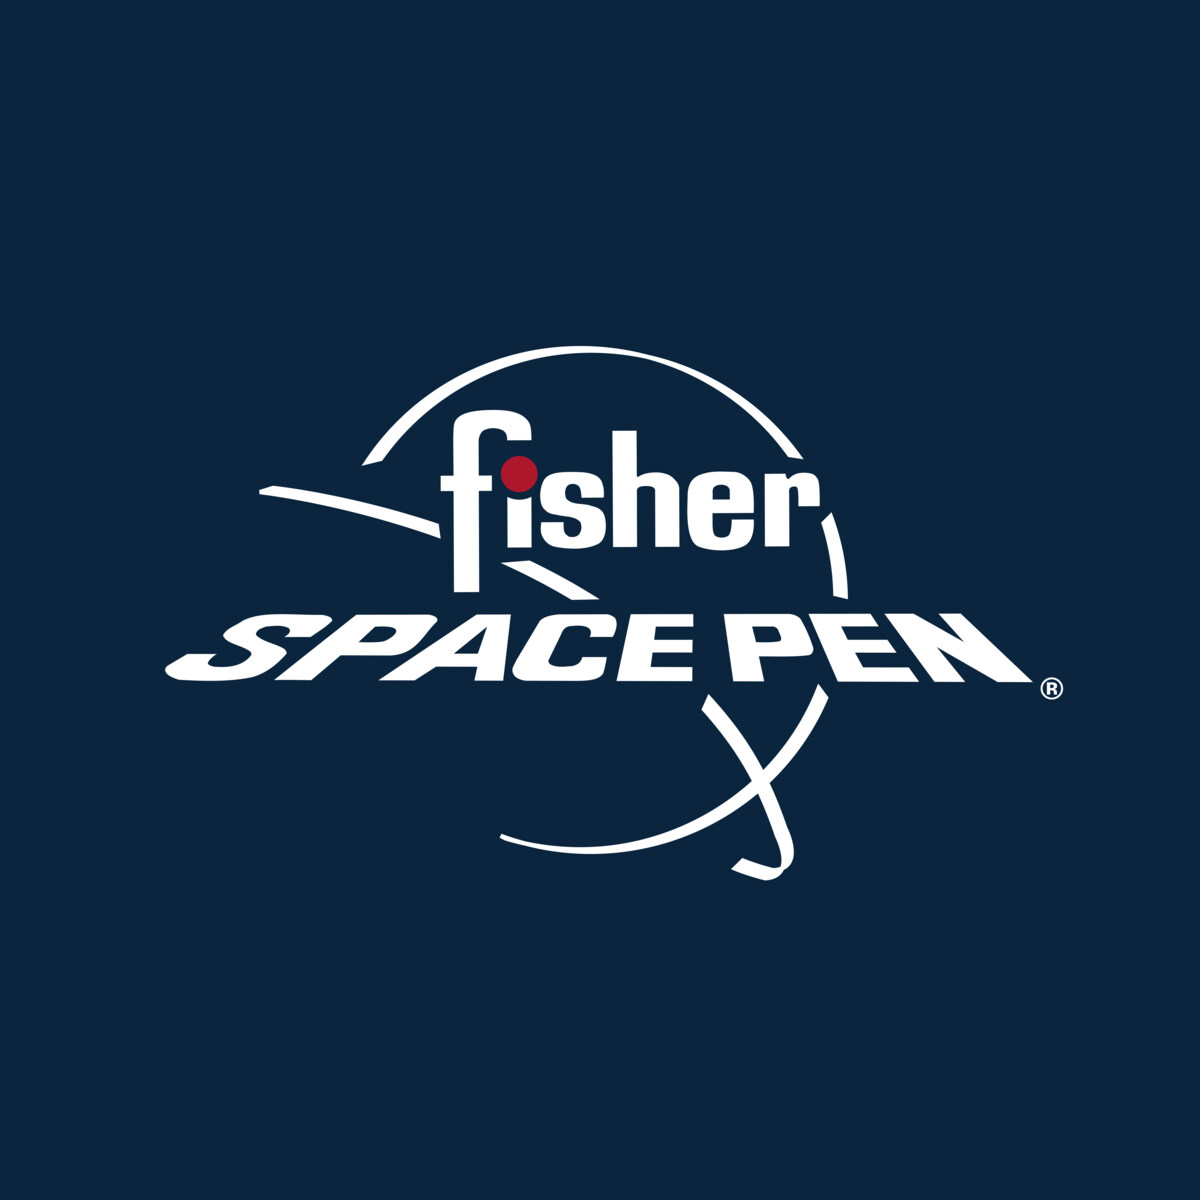 Fisher Space Pen AG7